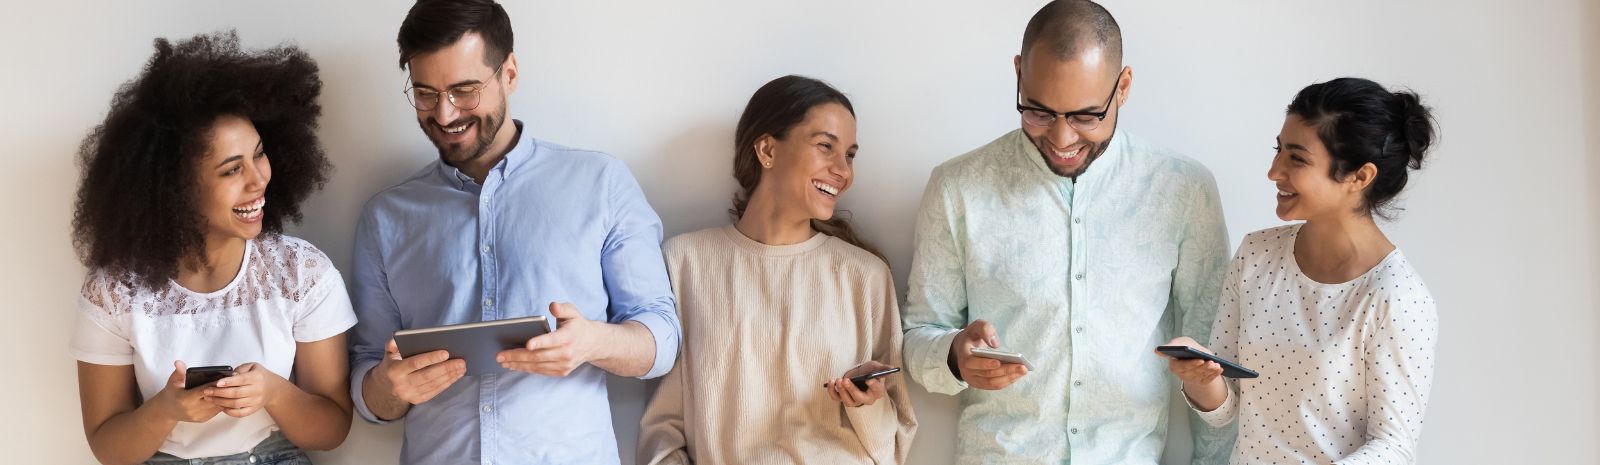 group holding mobile devices and smiling at each other